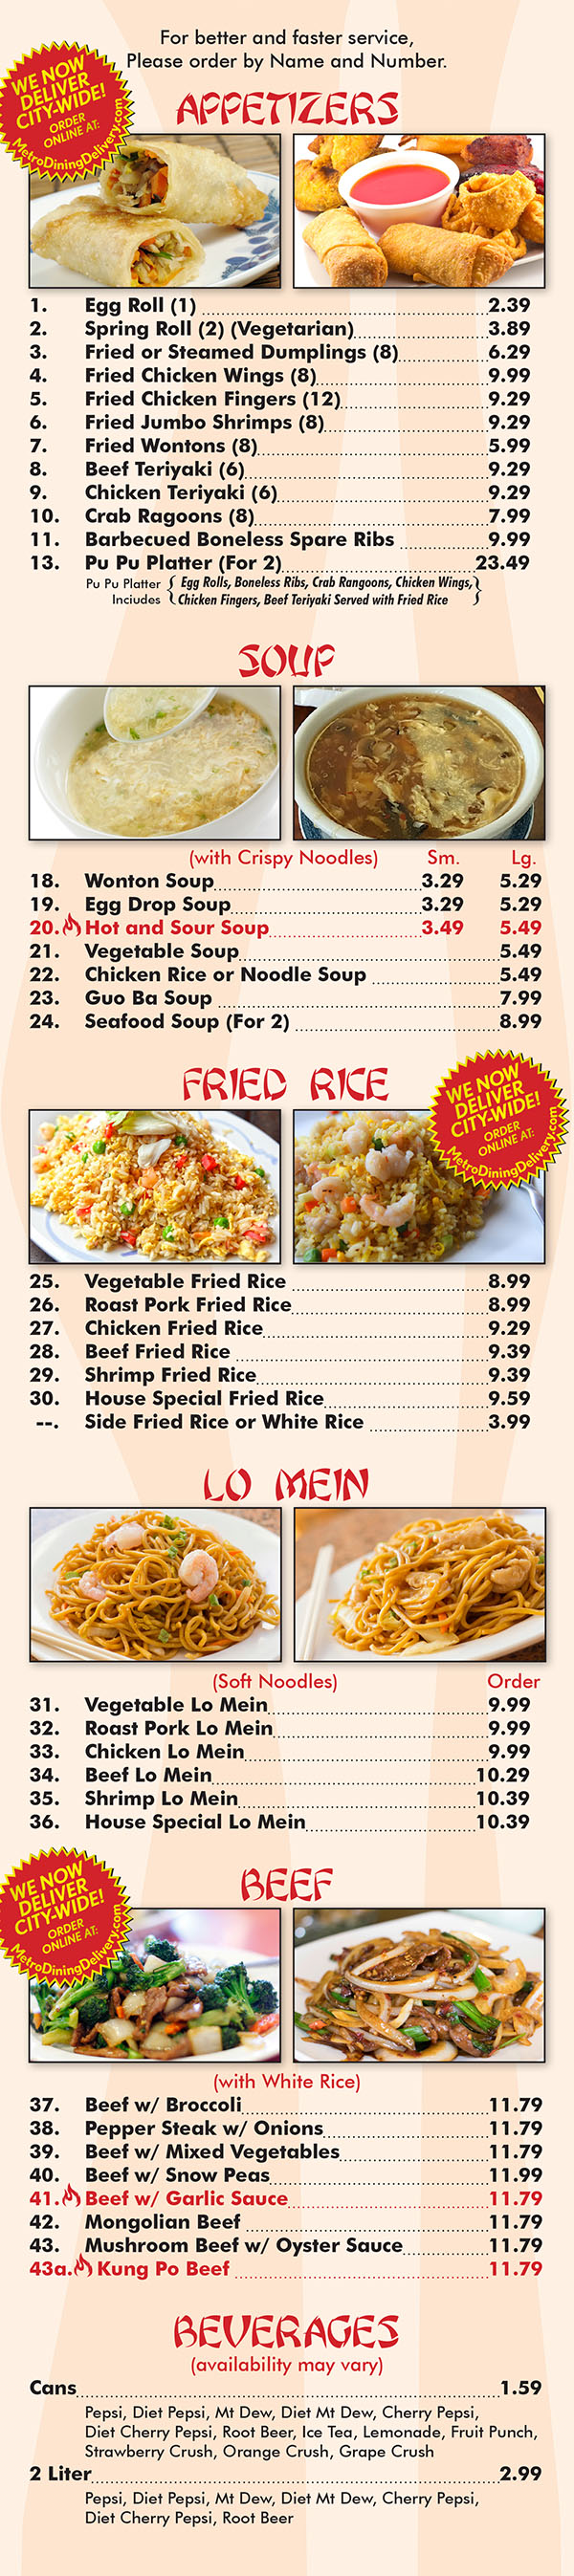 Ming's House Chinese Restaurant Menu Page 2
  For your better and faster service,
Please order by Name and Number.

APPETIZERS/Jl‘ffi}
1, Egg Roll (1)“ 1.59
3. Fried or Steamed Dumplings (5) 3.39
4. Fried Chicken Wings (8) 5.55
5. Fried Chicken Fingers (12) 6.29
7. Fried Wontons (8) 3.69
8. Beef Teriyclki (6) 6.95
9. Chicken Teriyaki (6) 6.95
10. Crab Ragoons (8) 5.45
11. Barbecued Boneless Spare Ribs 6.99
13. Pu Pu Platter (For 2) 16.99
Egg Rolls, Boneless Ribs, Crab Rangoons, Chicken Wings, Chicken
Fingers, Beef Teriyaki Served with Fried Rice
COMBINATION APPETIZERS
(with Fried Rice)
14. Egg Roll, Chicken Wings, Beef Teriyaki.......... 7.99
15. Egg Roll, Beef Teriyaki, Chicken Fingers........ 7.99
16. Egg Roll, Boneless Ribs, Chicken Fingers....... 7.99
17. Egg Roll, Chicken Wings, Chicken Teriyaki... 7.99
SOUP $4
(with Crispy Noodles) x Sm. Lg.
18. Wonton Soup 1.75 2.89
19. Egg Drop Soup 1.75 2.89
205 Hot and Sour Soup 1.95 3.69
22. Chicken Rice or Noodle Soup 3.69
23. Guo Ba Soup 4.95
24. Seafood Soup (For 2) 5.79
Q FRIED RICE Lg.
25. Vegetable Fried Rice 6.25
26. Roast Pork Fried Rice 6.45
27. Chicken Fried Rice 6.45
28. Beef Fried Rice 6.95
29. Shrimp Fried Rice 7.25
30. House Special Fried Rice 7.35
300. Side Fried Rice or White Rice 2’55
LO MEIN
(Soft Noodles) Order
31. Vegetable Lo Mem 7.25
32. Roast Pork Lo Mem 7.45
33. Chicken Lo Mein 7.45
34. Beef Lo Mein 7.55
35. Shrimp Lo Mein 7,55
36. House Special Lo Meln 7.95
‘Q;
I £2 BEEF
“i (with White Rice)
38. Pepper Steak w/ Onions 8,85
39. Beef w/ Mixed Vegetables 8,85
41.\ Beef w/ Garlic Sauce 8,85
43. Mushroom Beef w/ Oyster Sauce..................... 8.85
430. Kung Po Beef 8-85
x HOT & SPICY
You Can Choose Fried Rice or White Rice